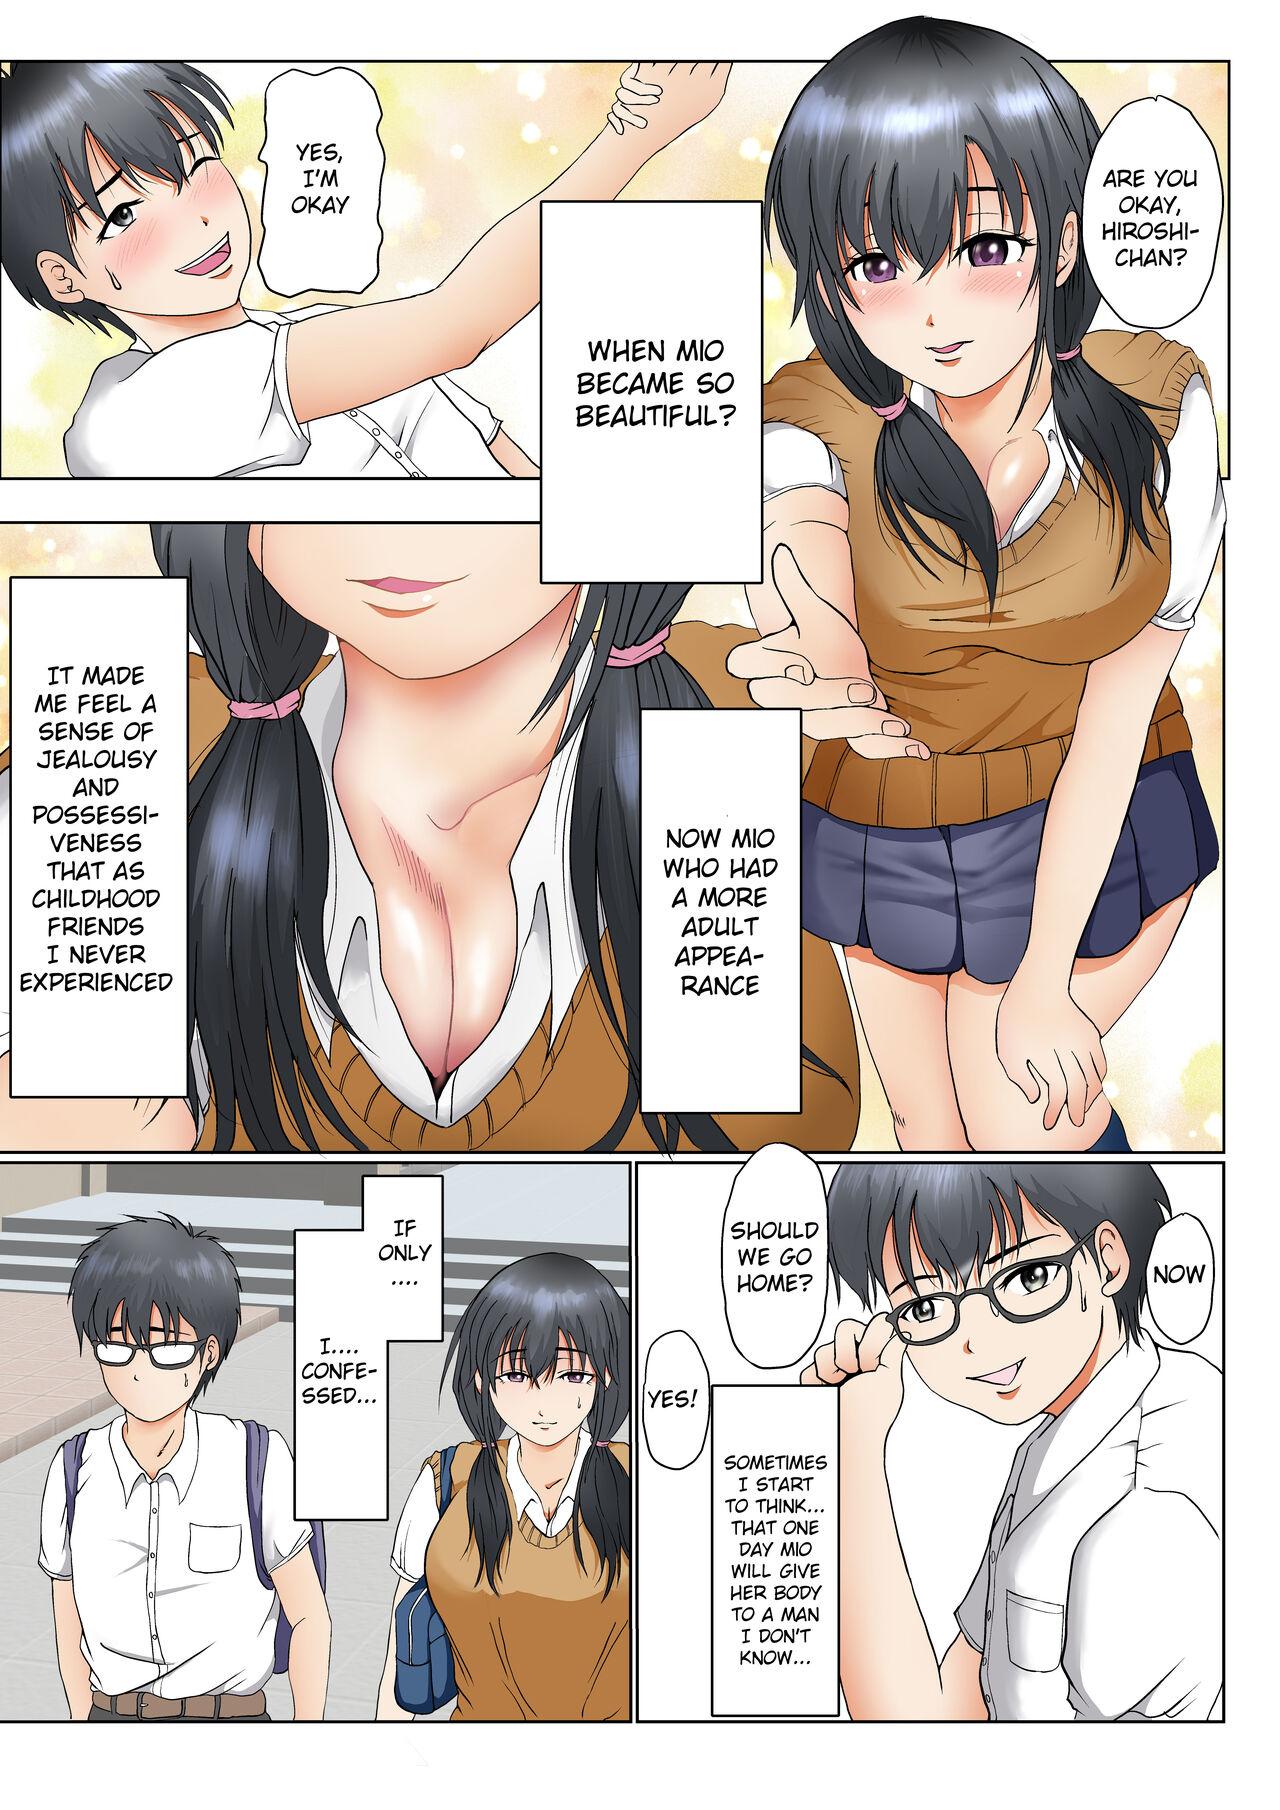 Double Penetration The reason why the bond with my childhood friend is broken so easily - Original Free - Page 10